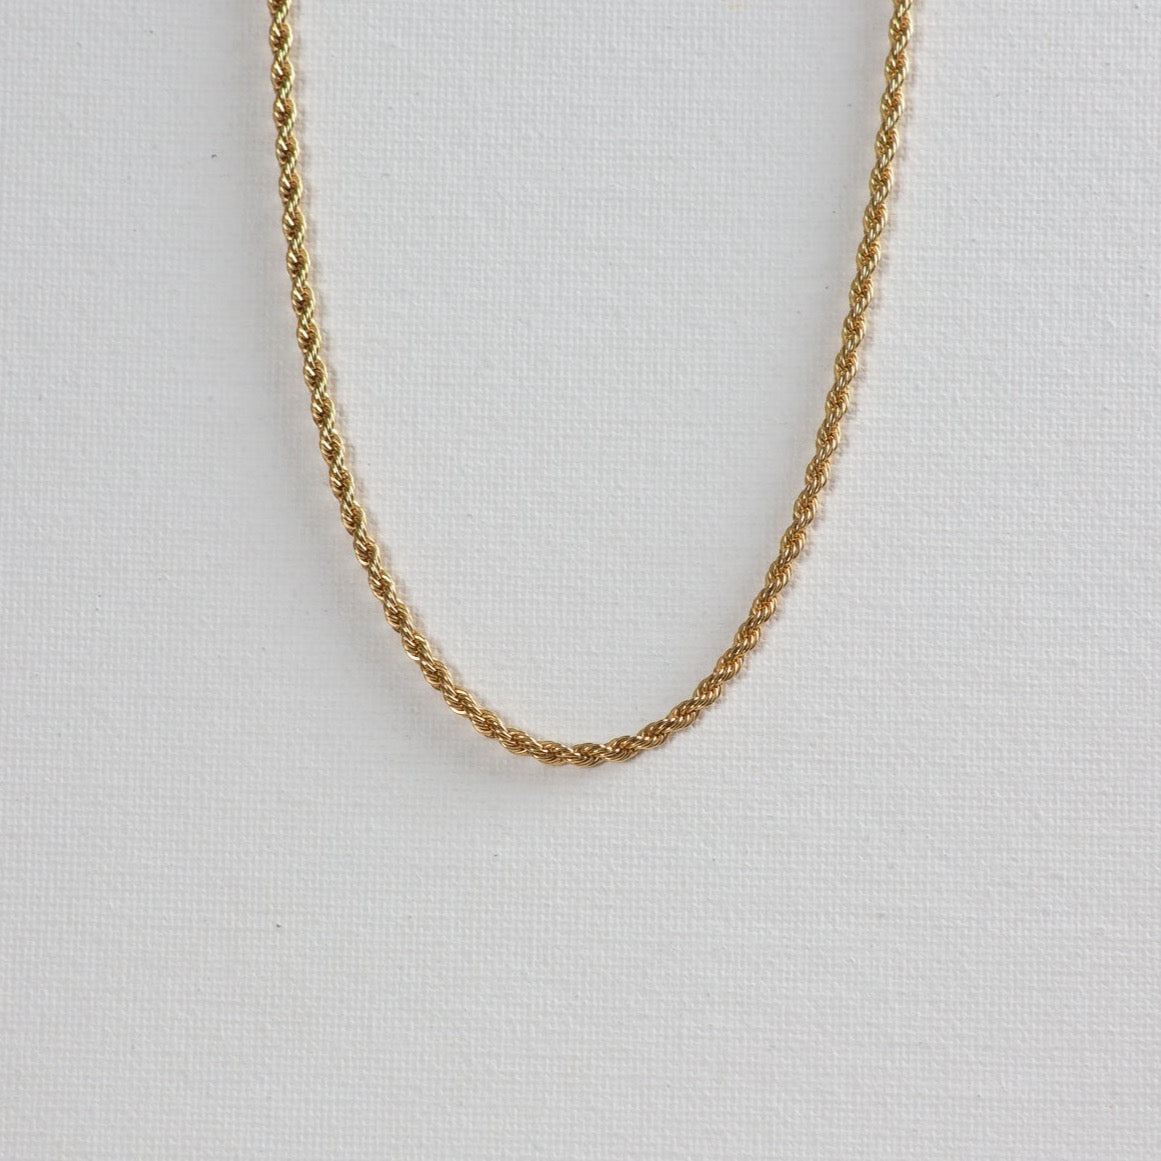 The twisted gold necklace on a white background.